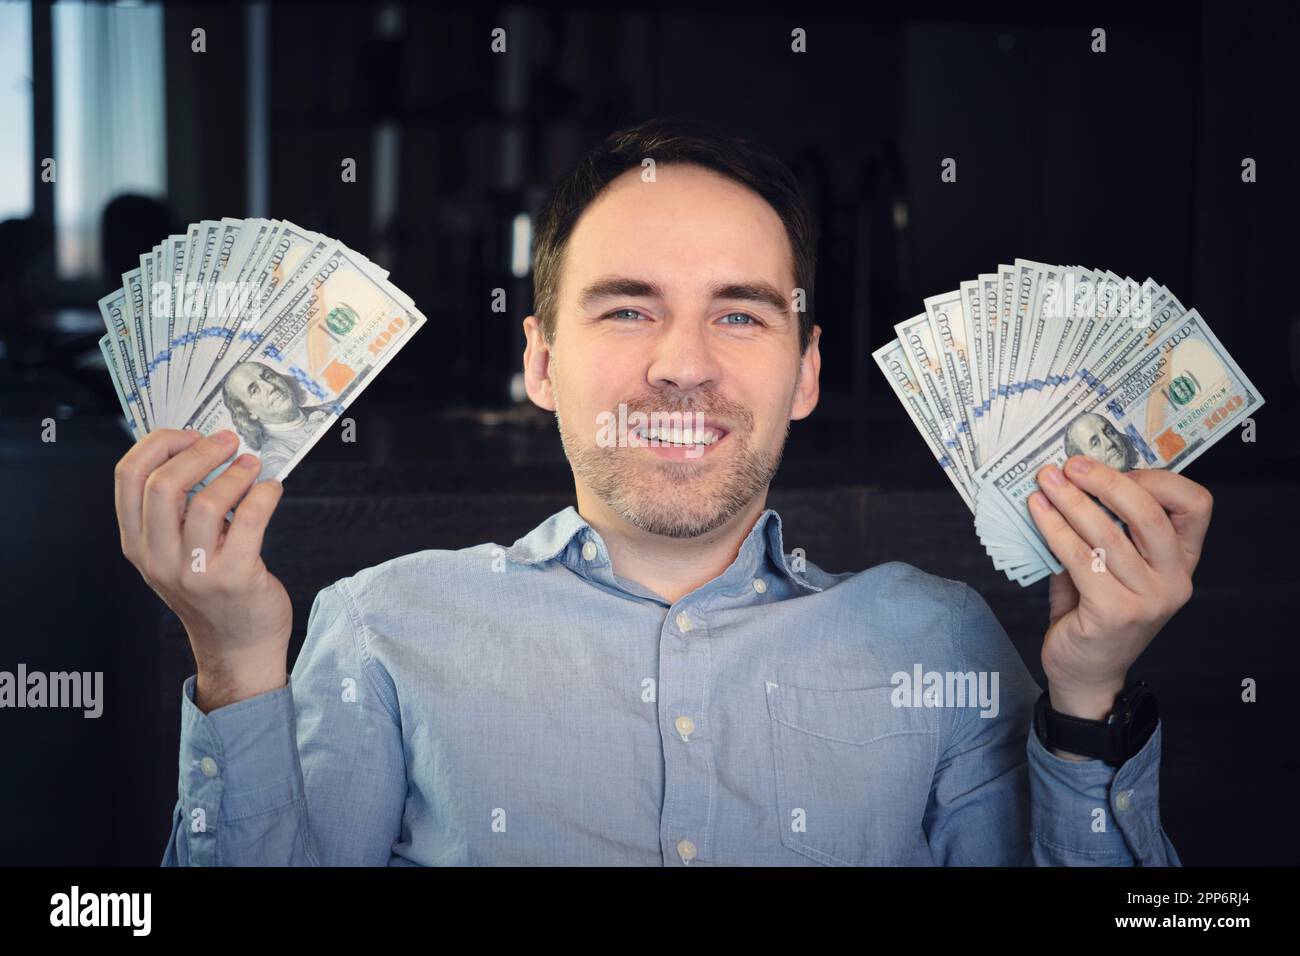 Hands holding dollar cash. 1000 dollars in 100 bills in a man's hand close-up on a dark background. Stock Photo